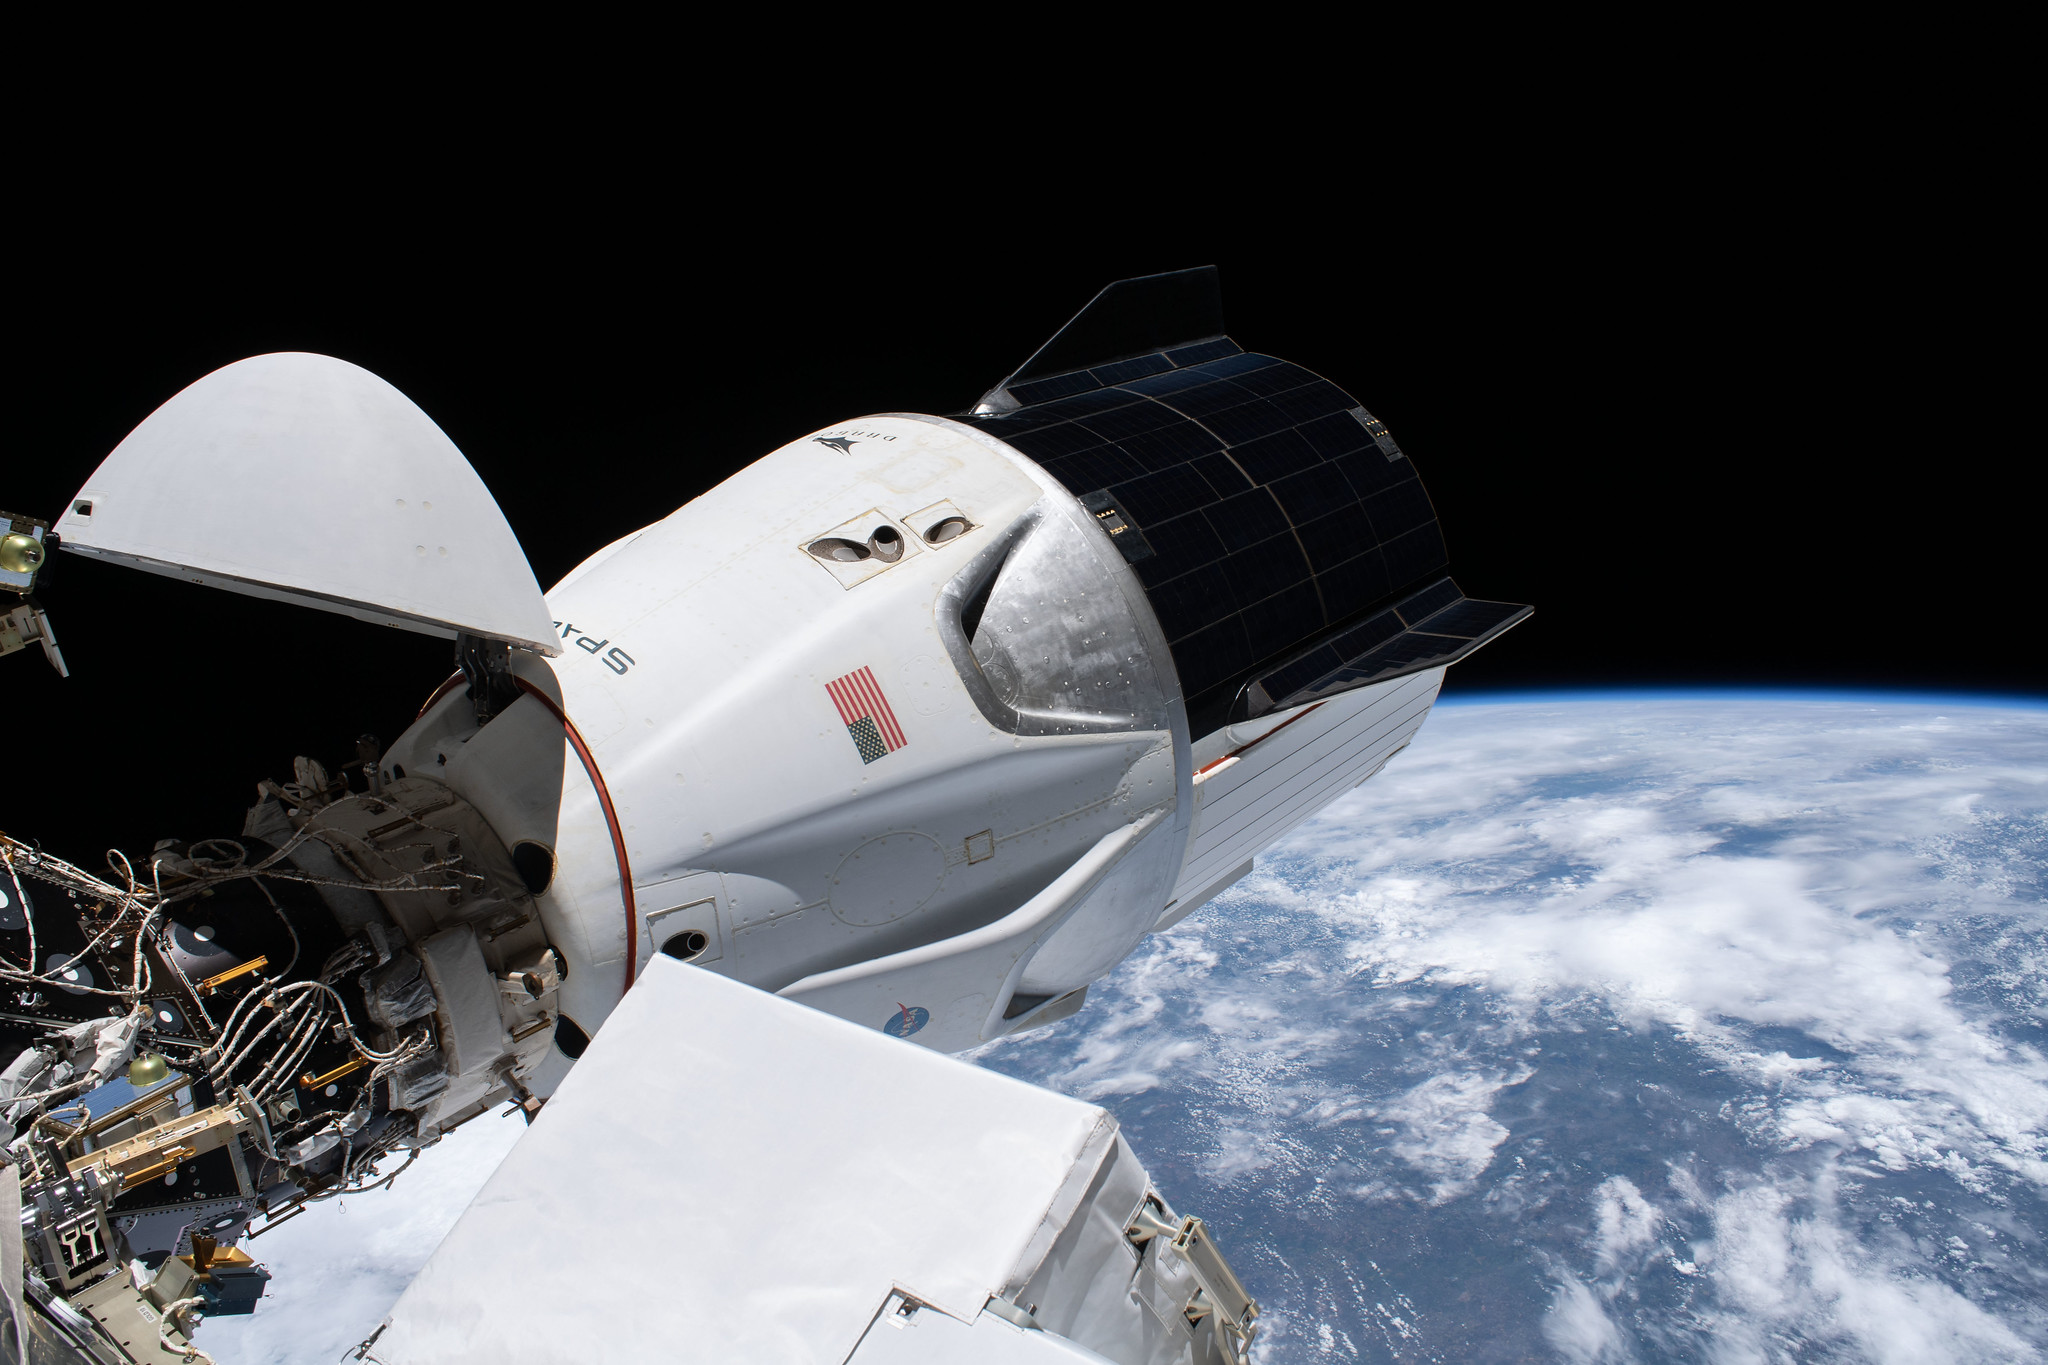 The SpaceX Crew Dragon spacecraft is pictured docked to the Harmony module's forward international docking adapter